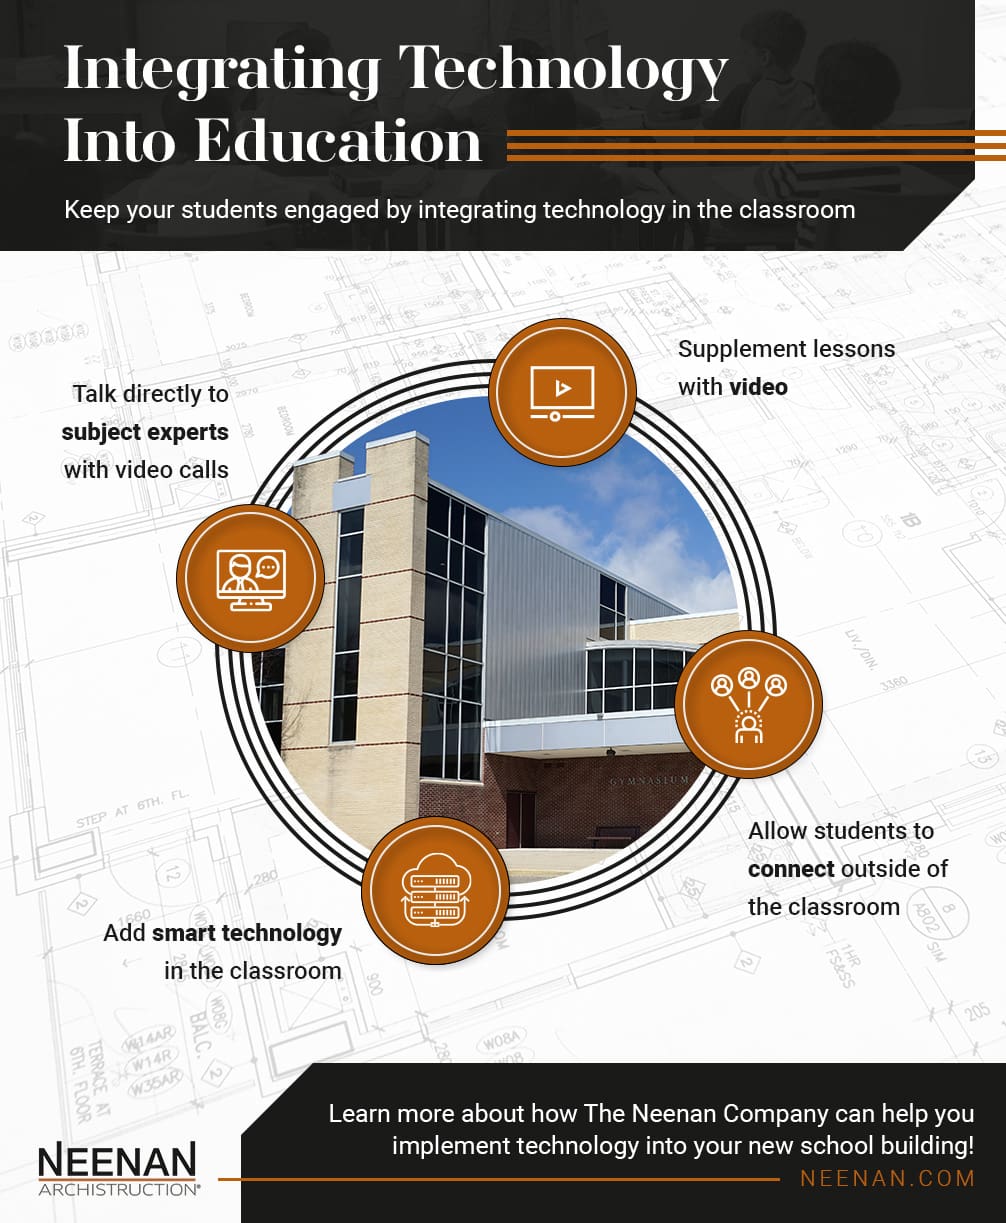 Integrating-Technology-Into-Education infographic